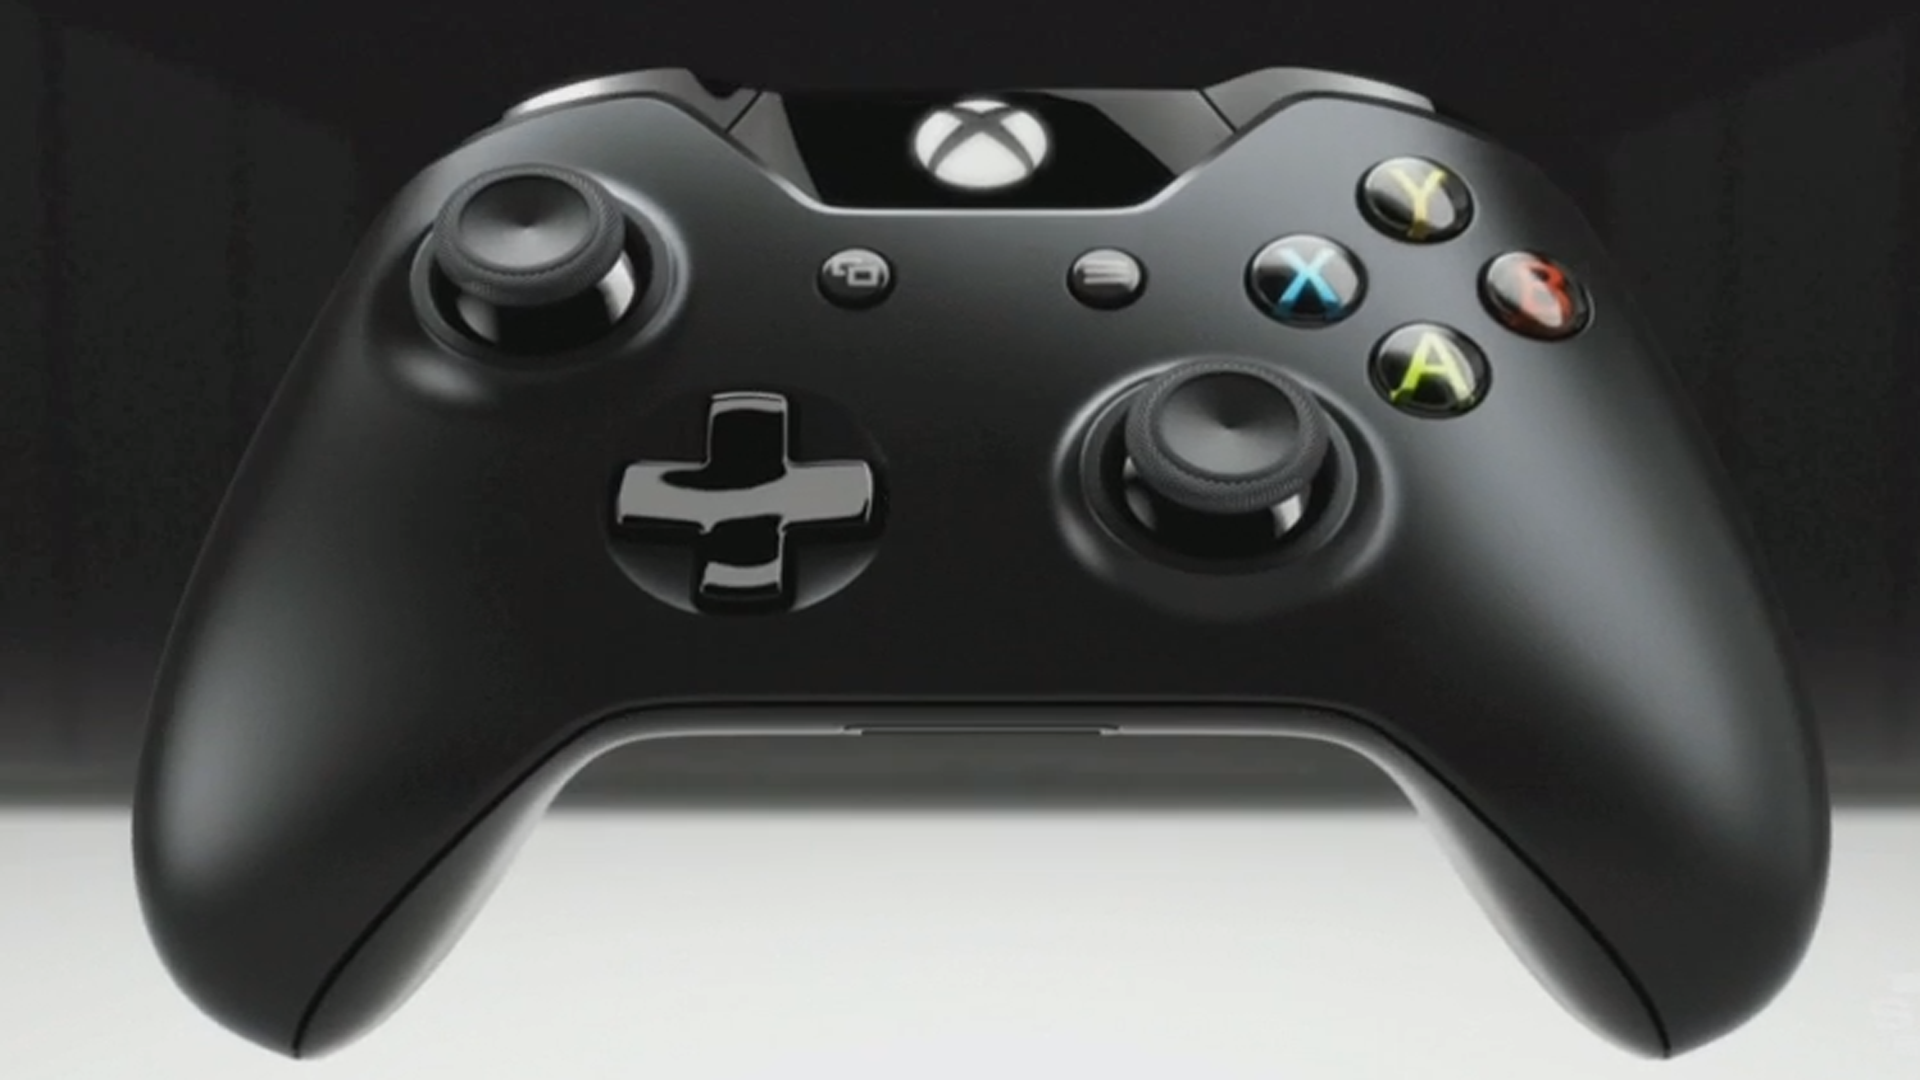 Wallpaper Xbox One HD Image 1080p Upload At January